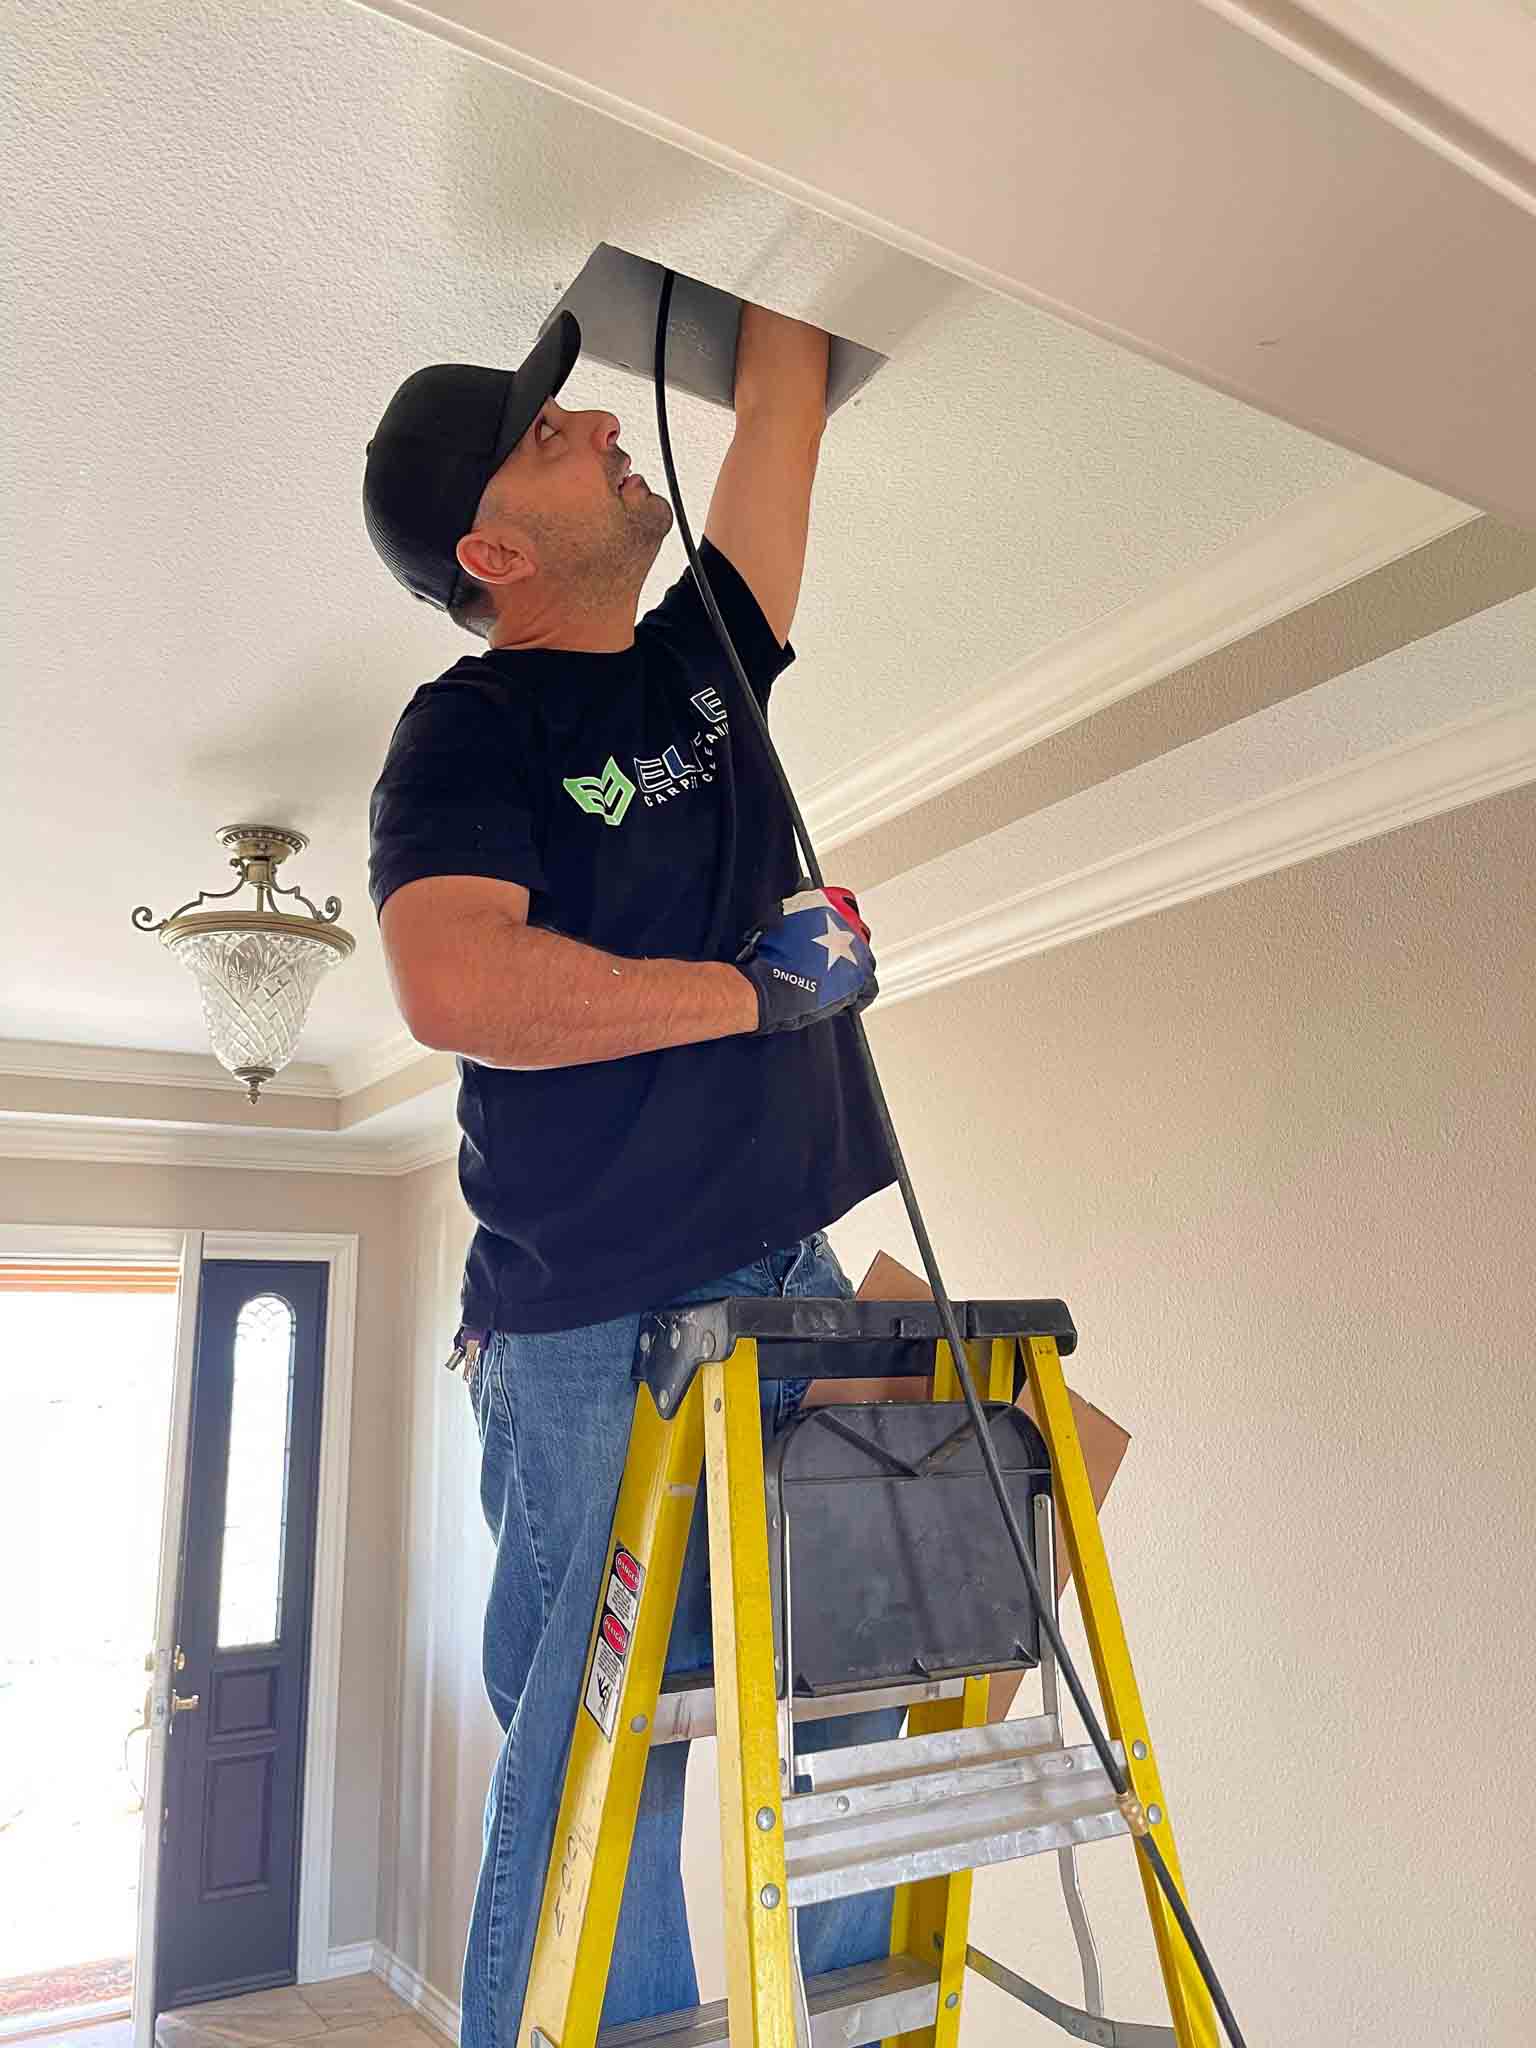 Air Duct being cleaned by Michael Mendoza of Elite Carpet Cleaning in Odessa Tx